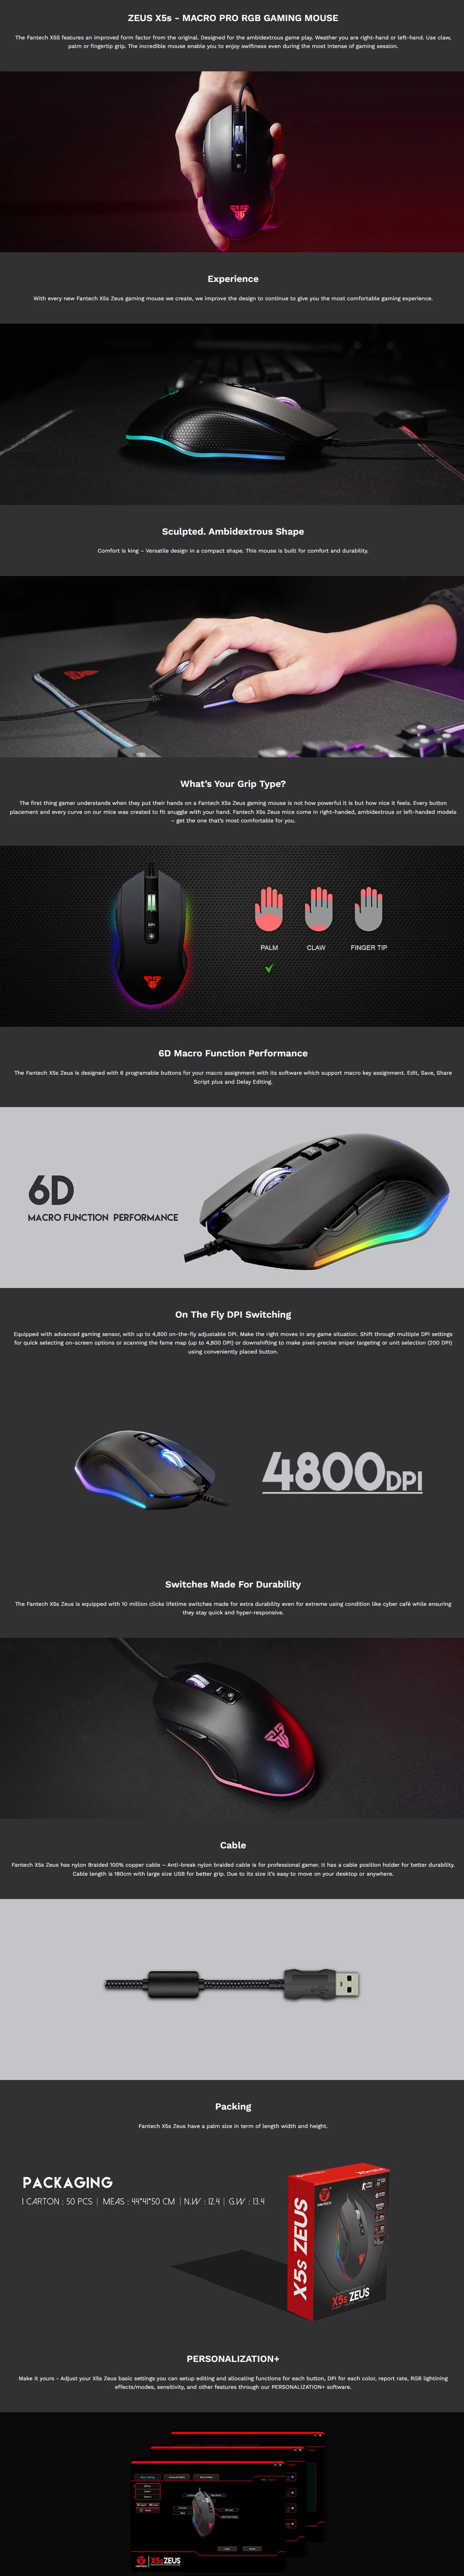 Overview - Fantech Zeus X5s Macro Programmable RGB Gaming Mouse